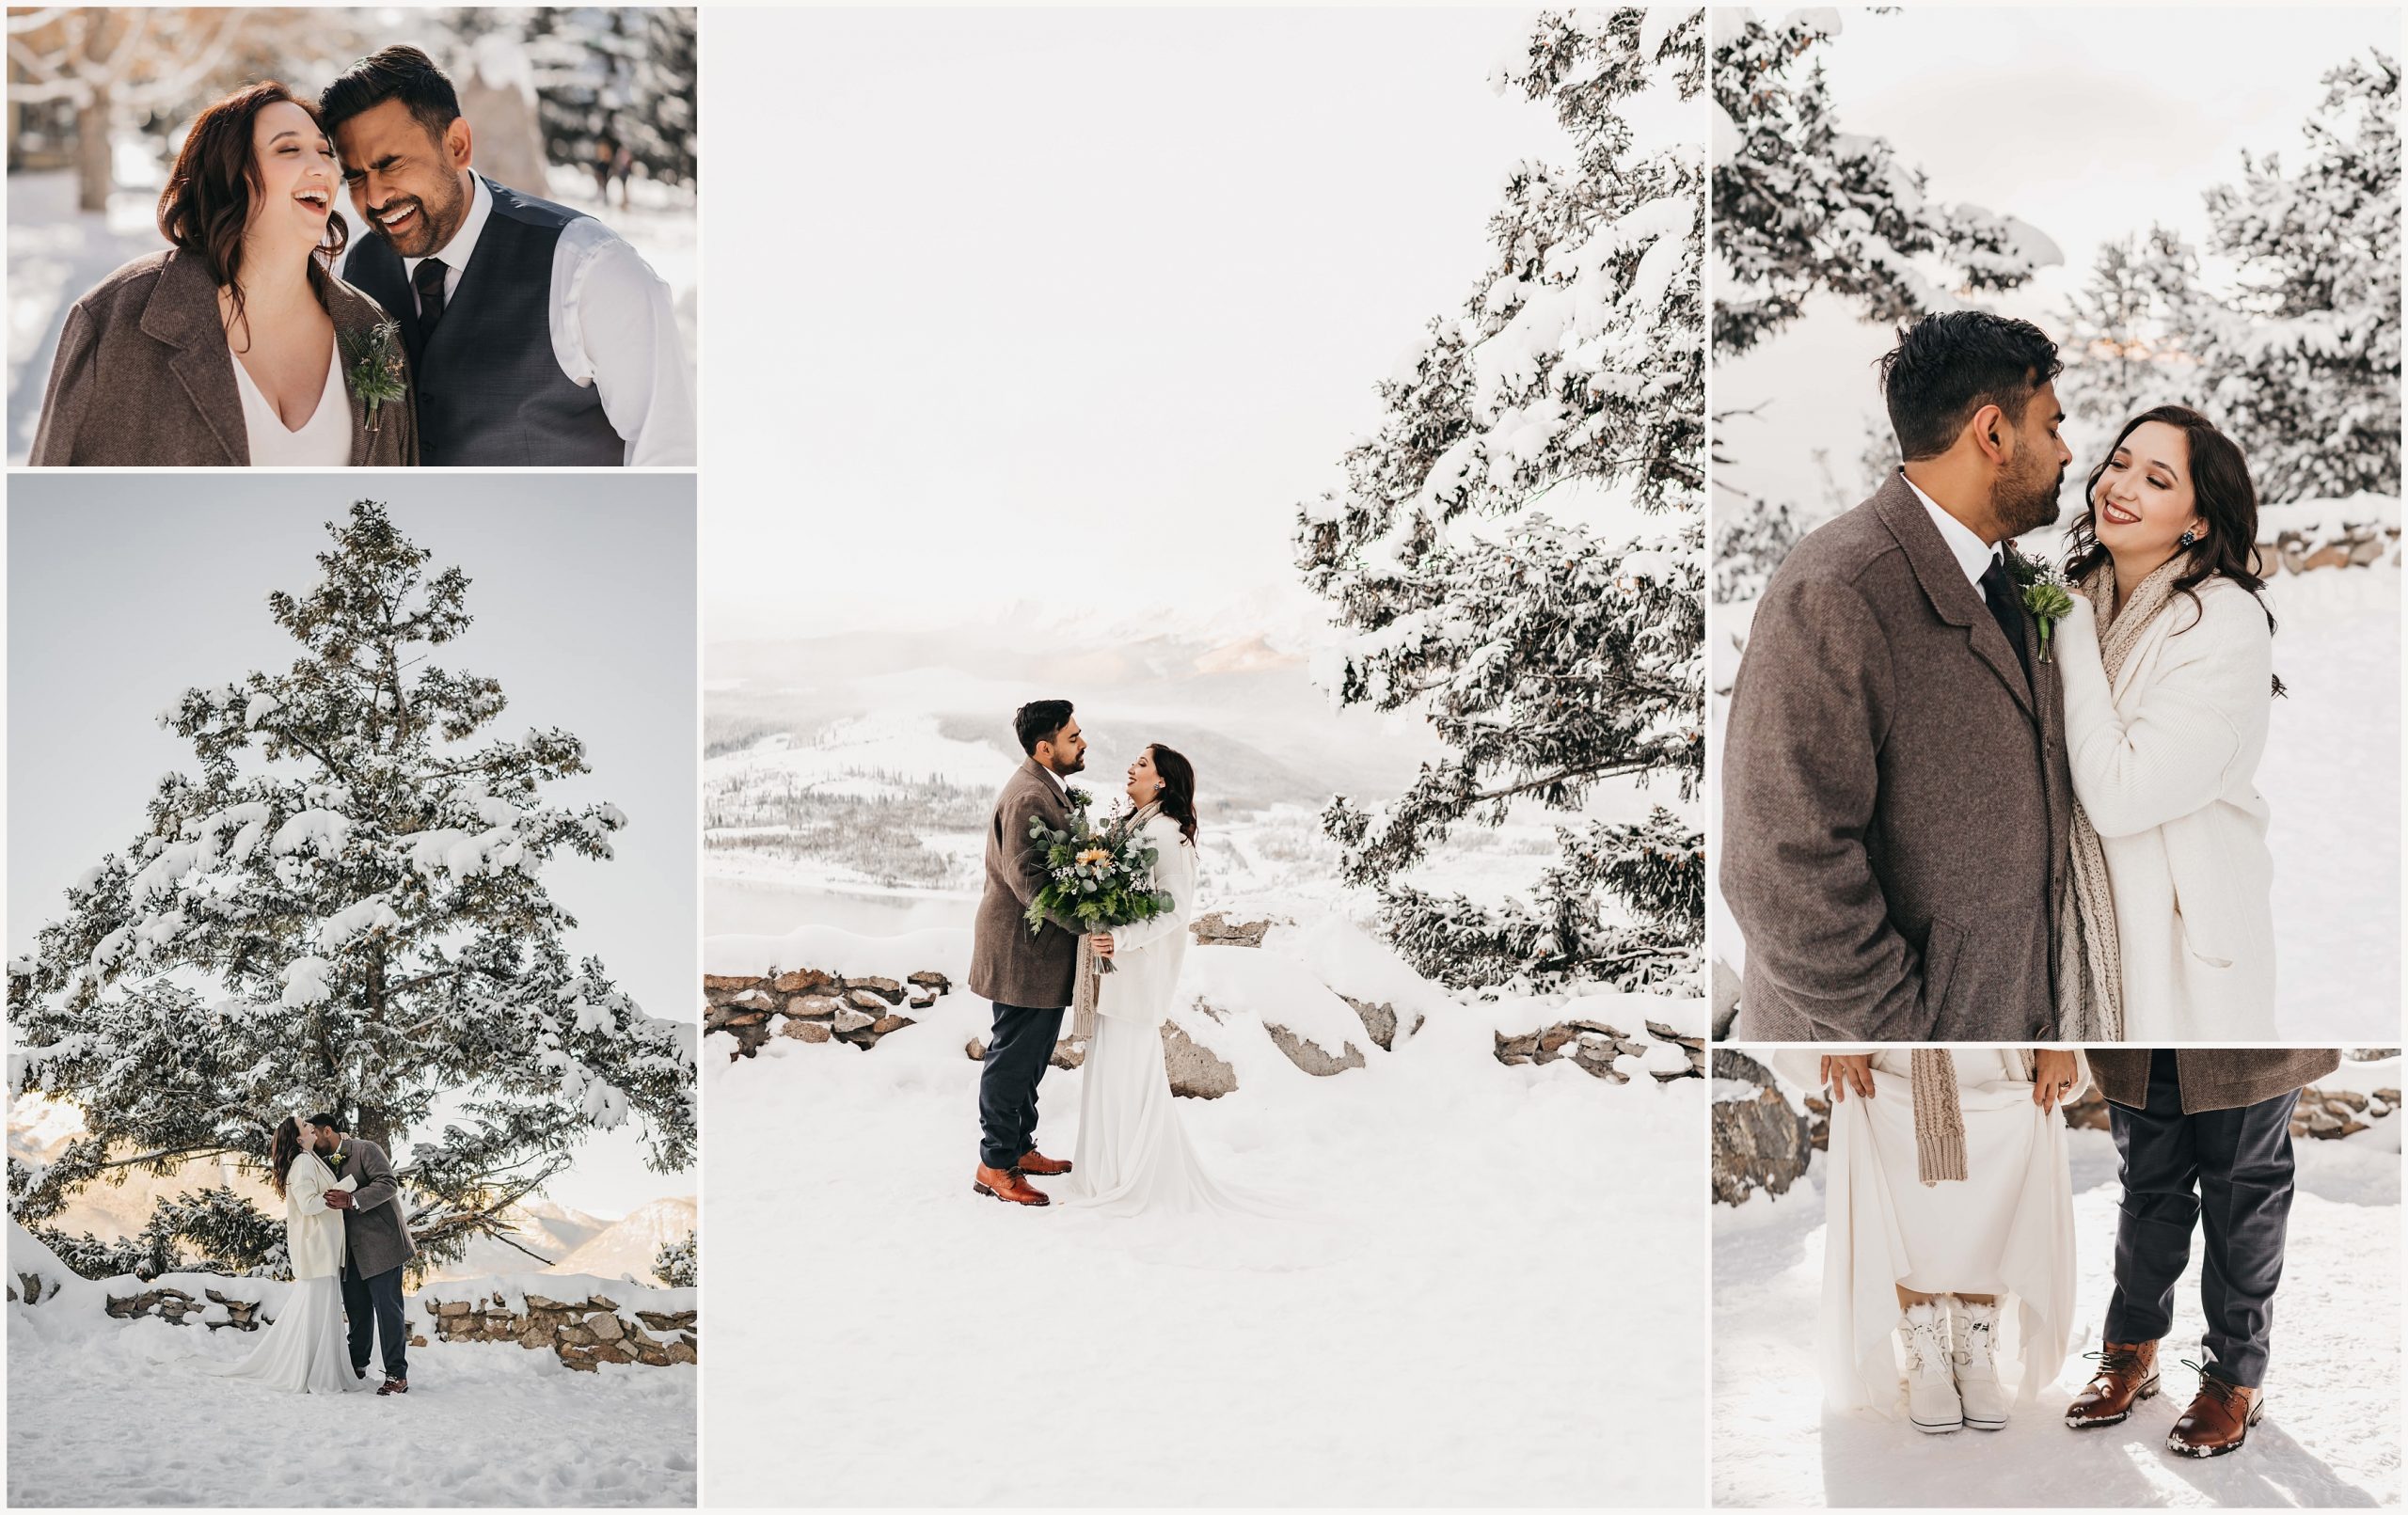 When to elope in Colorado, Best Month to Have an Outdoor Wedding in Colorado, Colorado Elopement Inspiration, Winter Colorado Elopement, Spring Colorado Elopement, Summer Colorado Elopement, Fall Colorado Elopement, best month to elope in Colorado, the best time to elope in Colorado, winter elopement